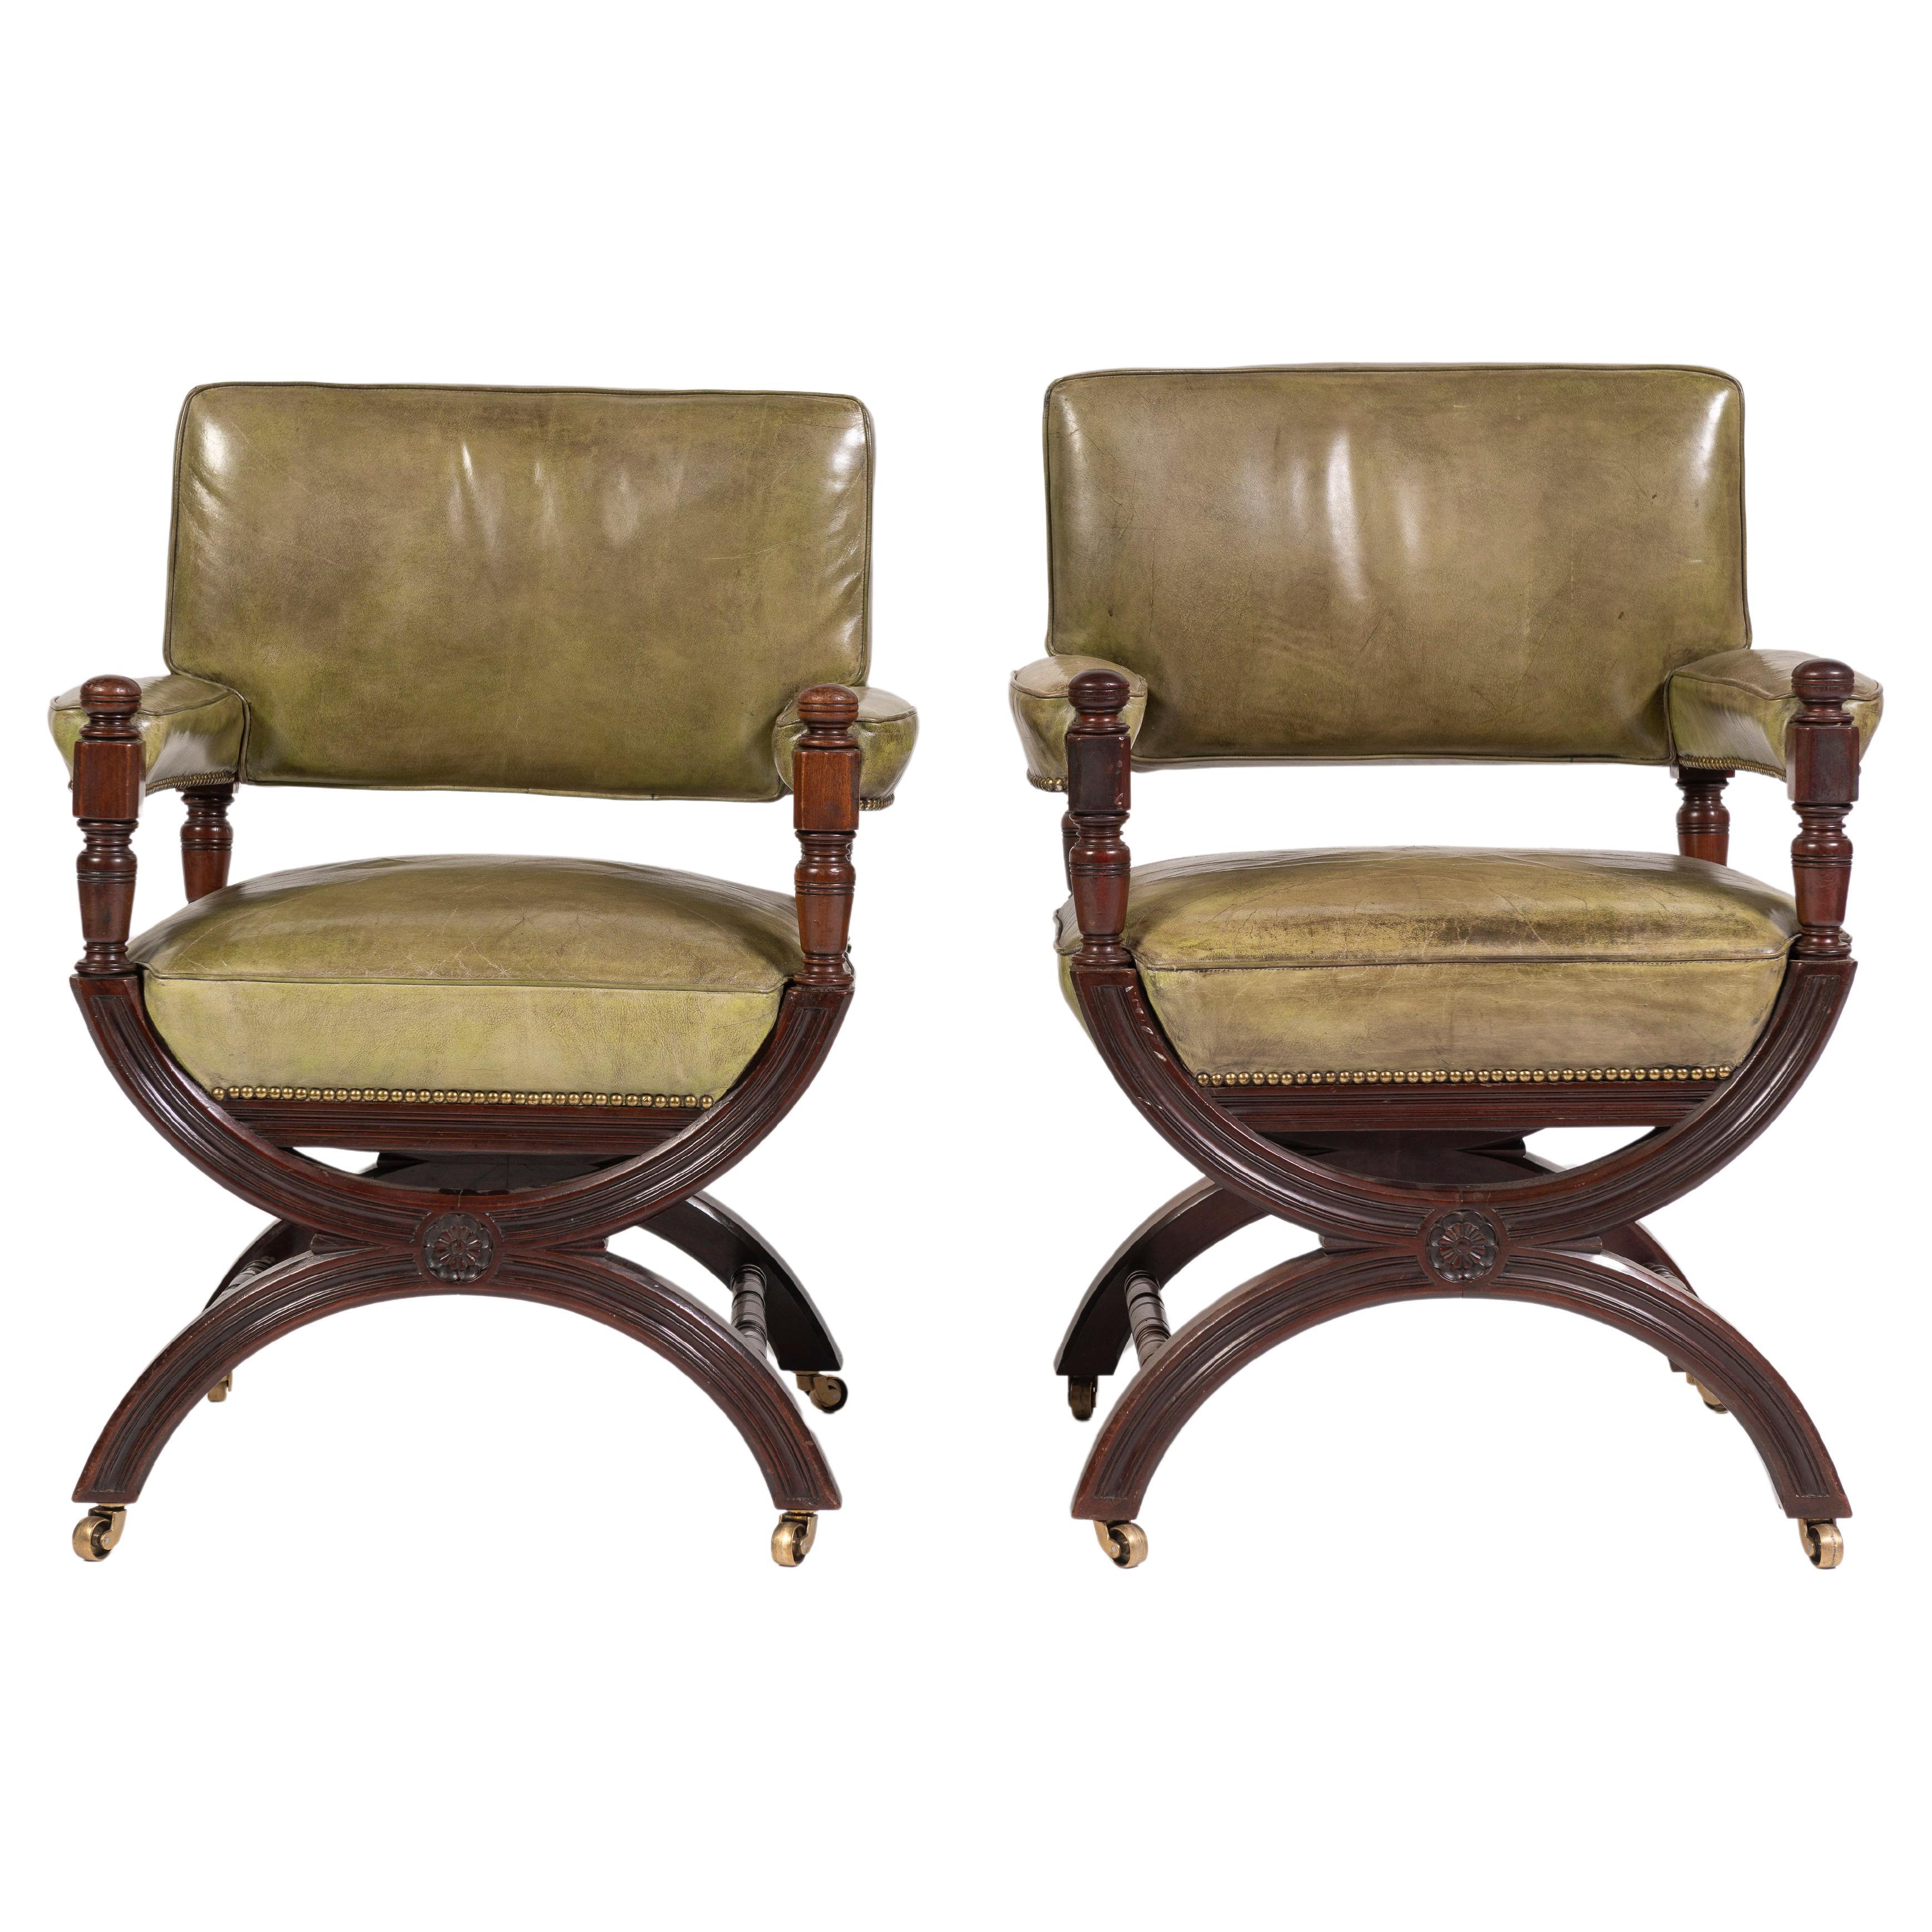 Pair of 19th Century English Leather and Mahogany Armchairs